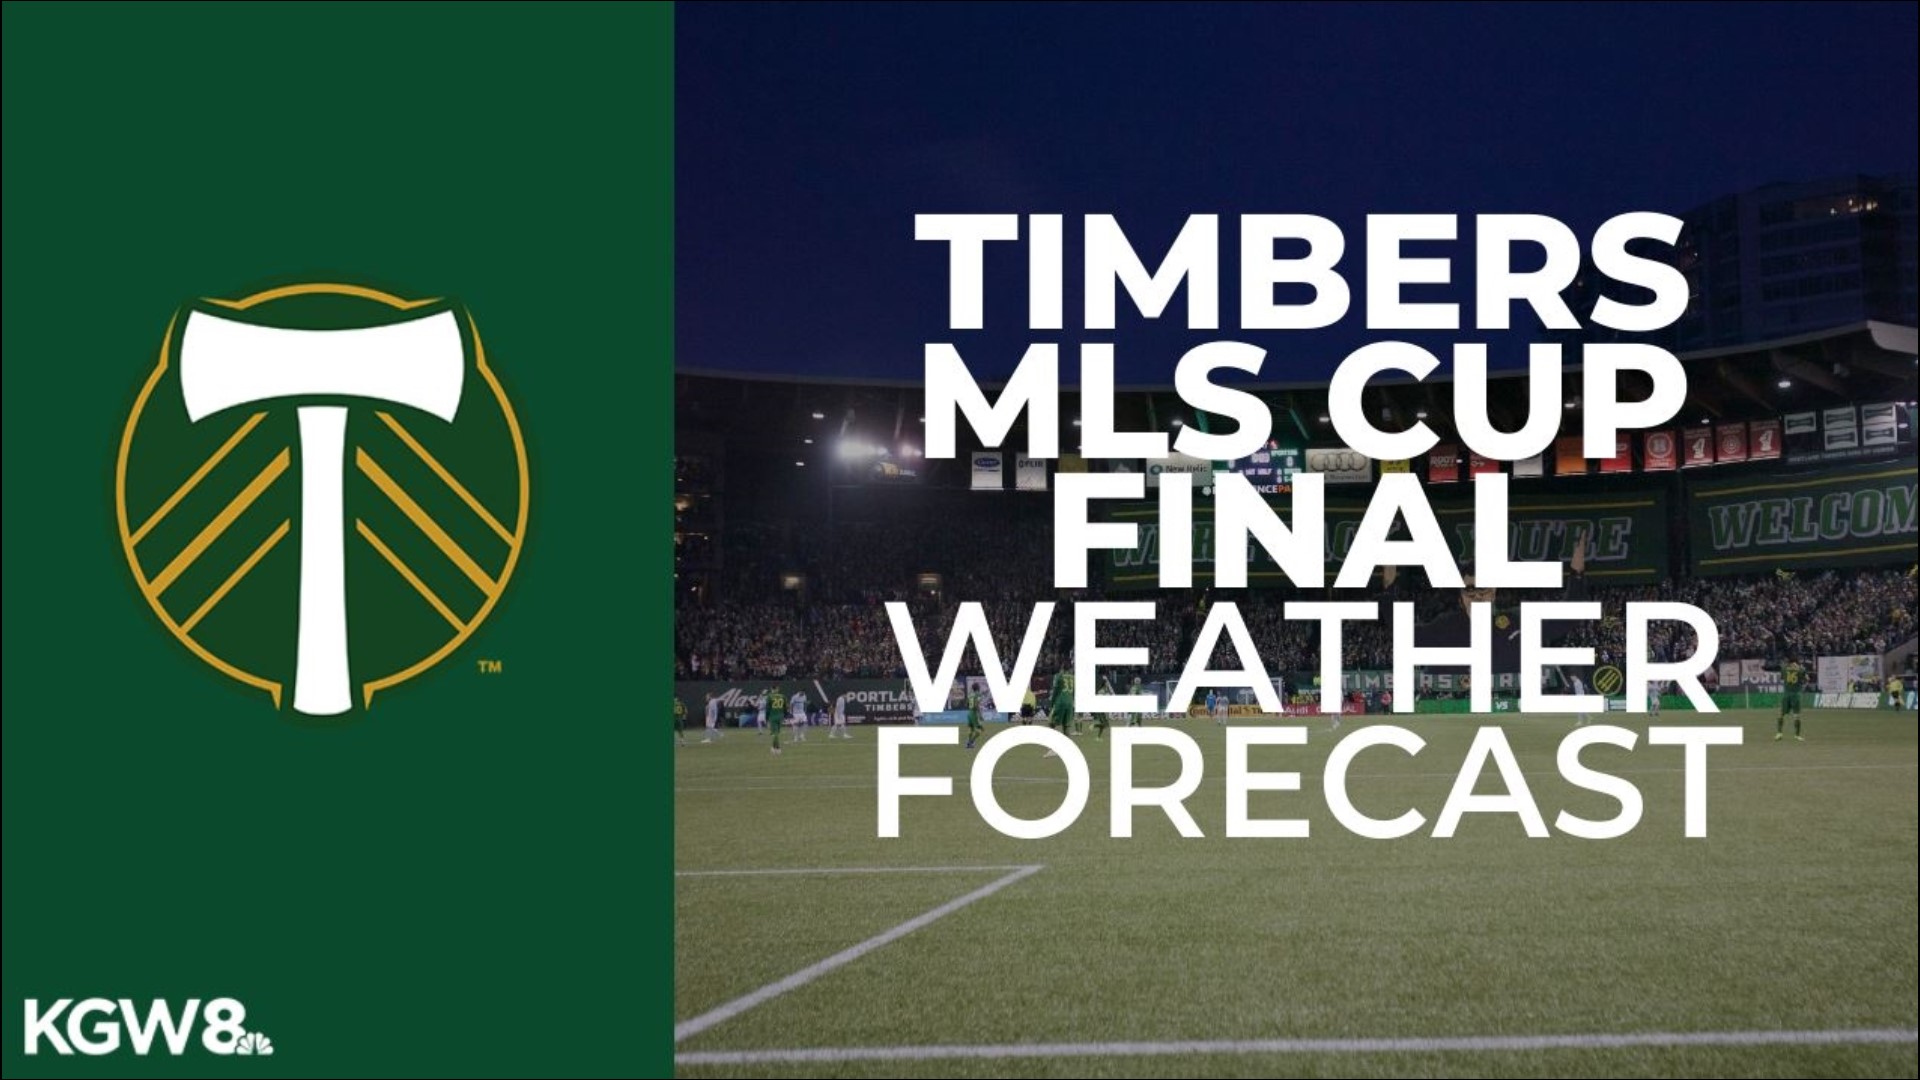 Portland plays NYCFC on Dec. 11 for the MLS Cup. Fans will have to brave heavy rain and strong winds as the worst weather of the week coincides with the match.